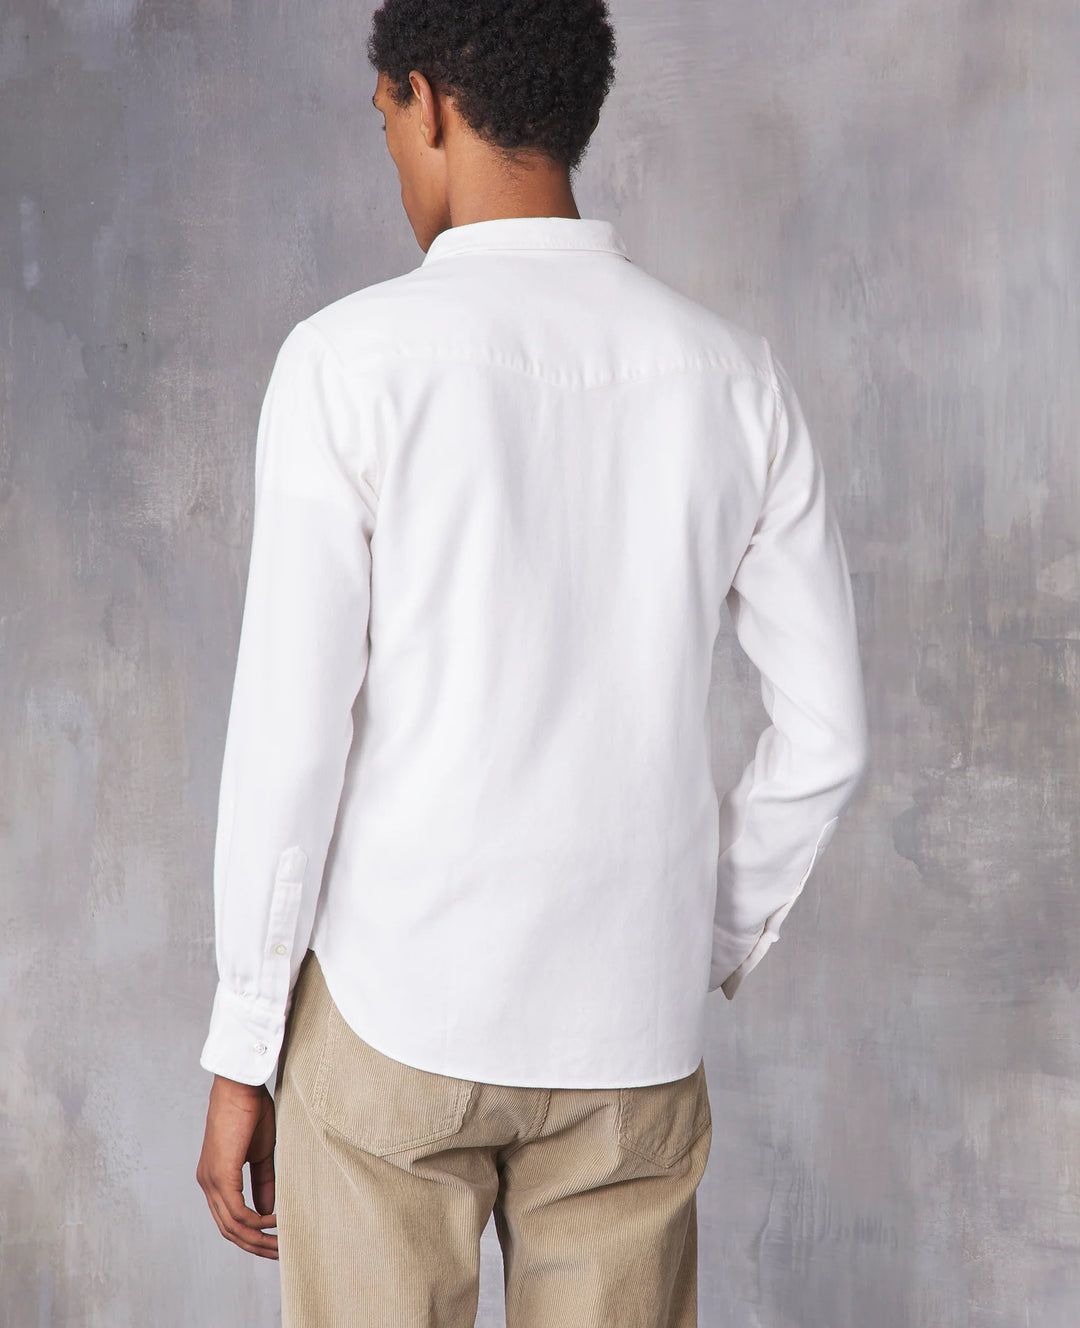 Officine Generale Lipp Shirt in White Brushed Cotton